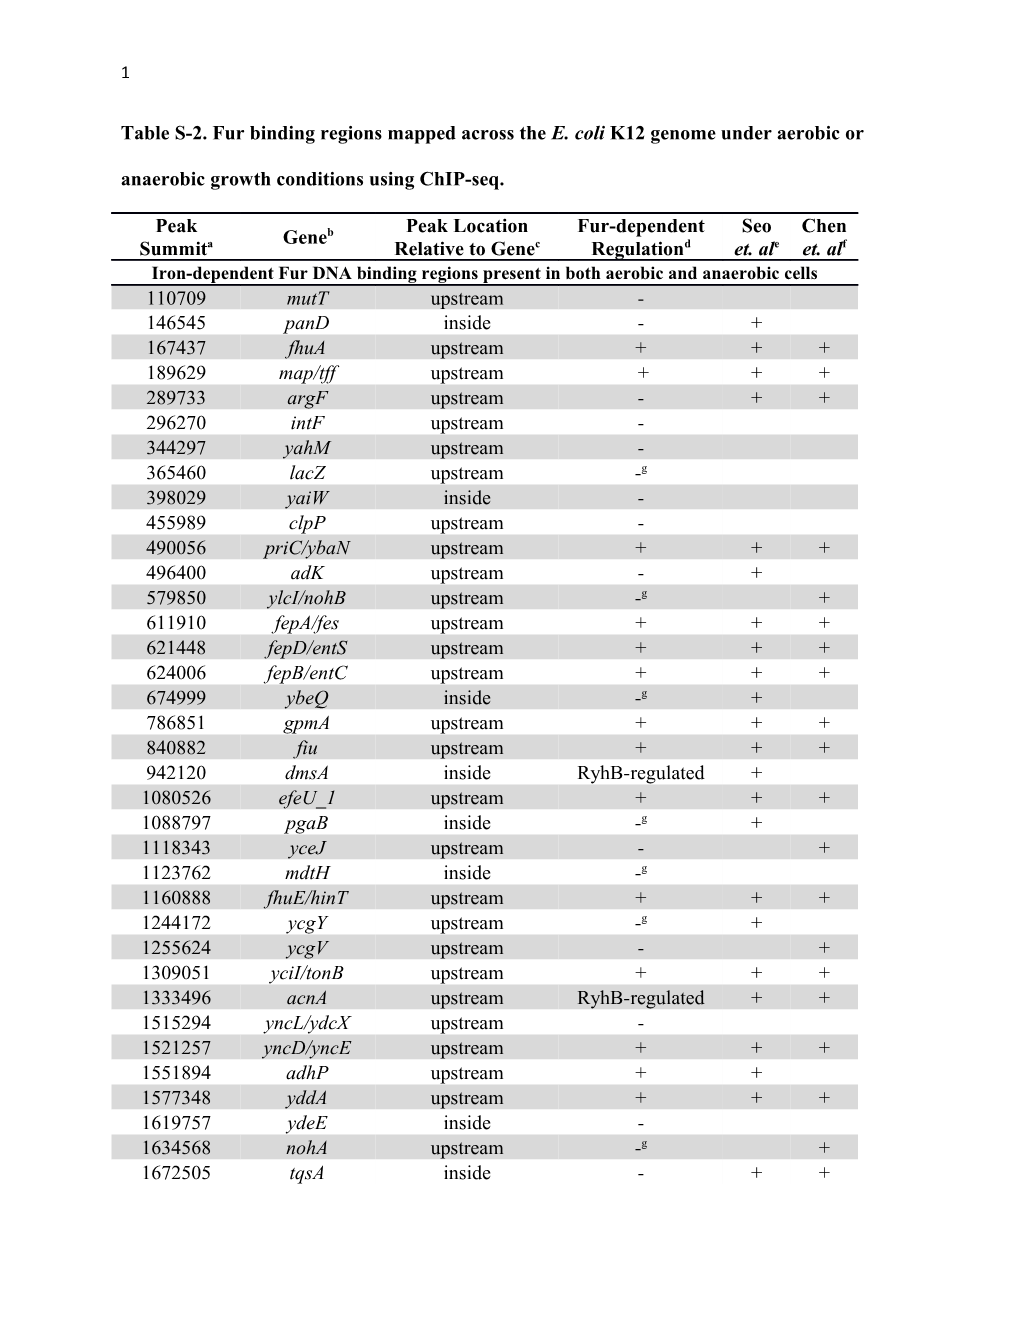 Table S-2. Fur Binding Regions Mapped Across the E. Coli K12 Genome Under Aerobic Or Anaerobic